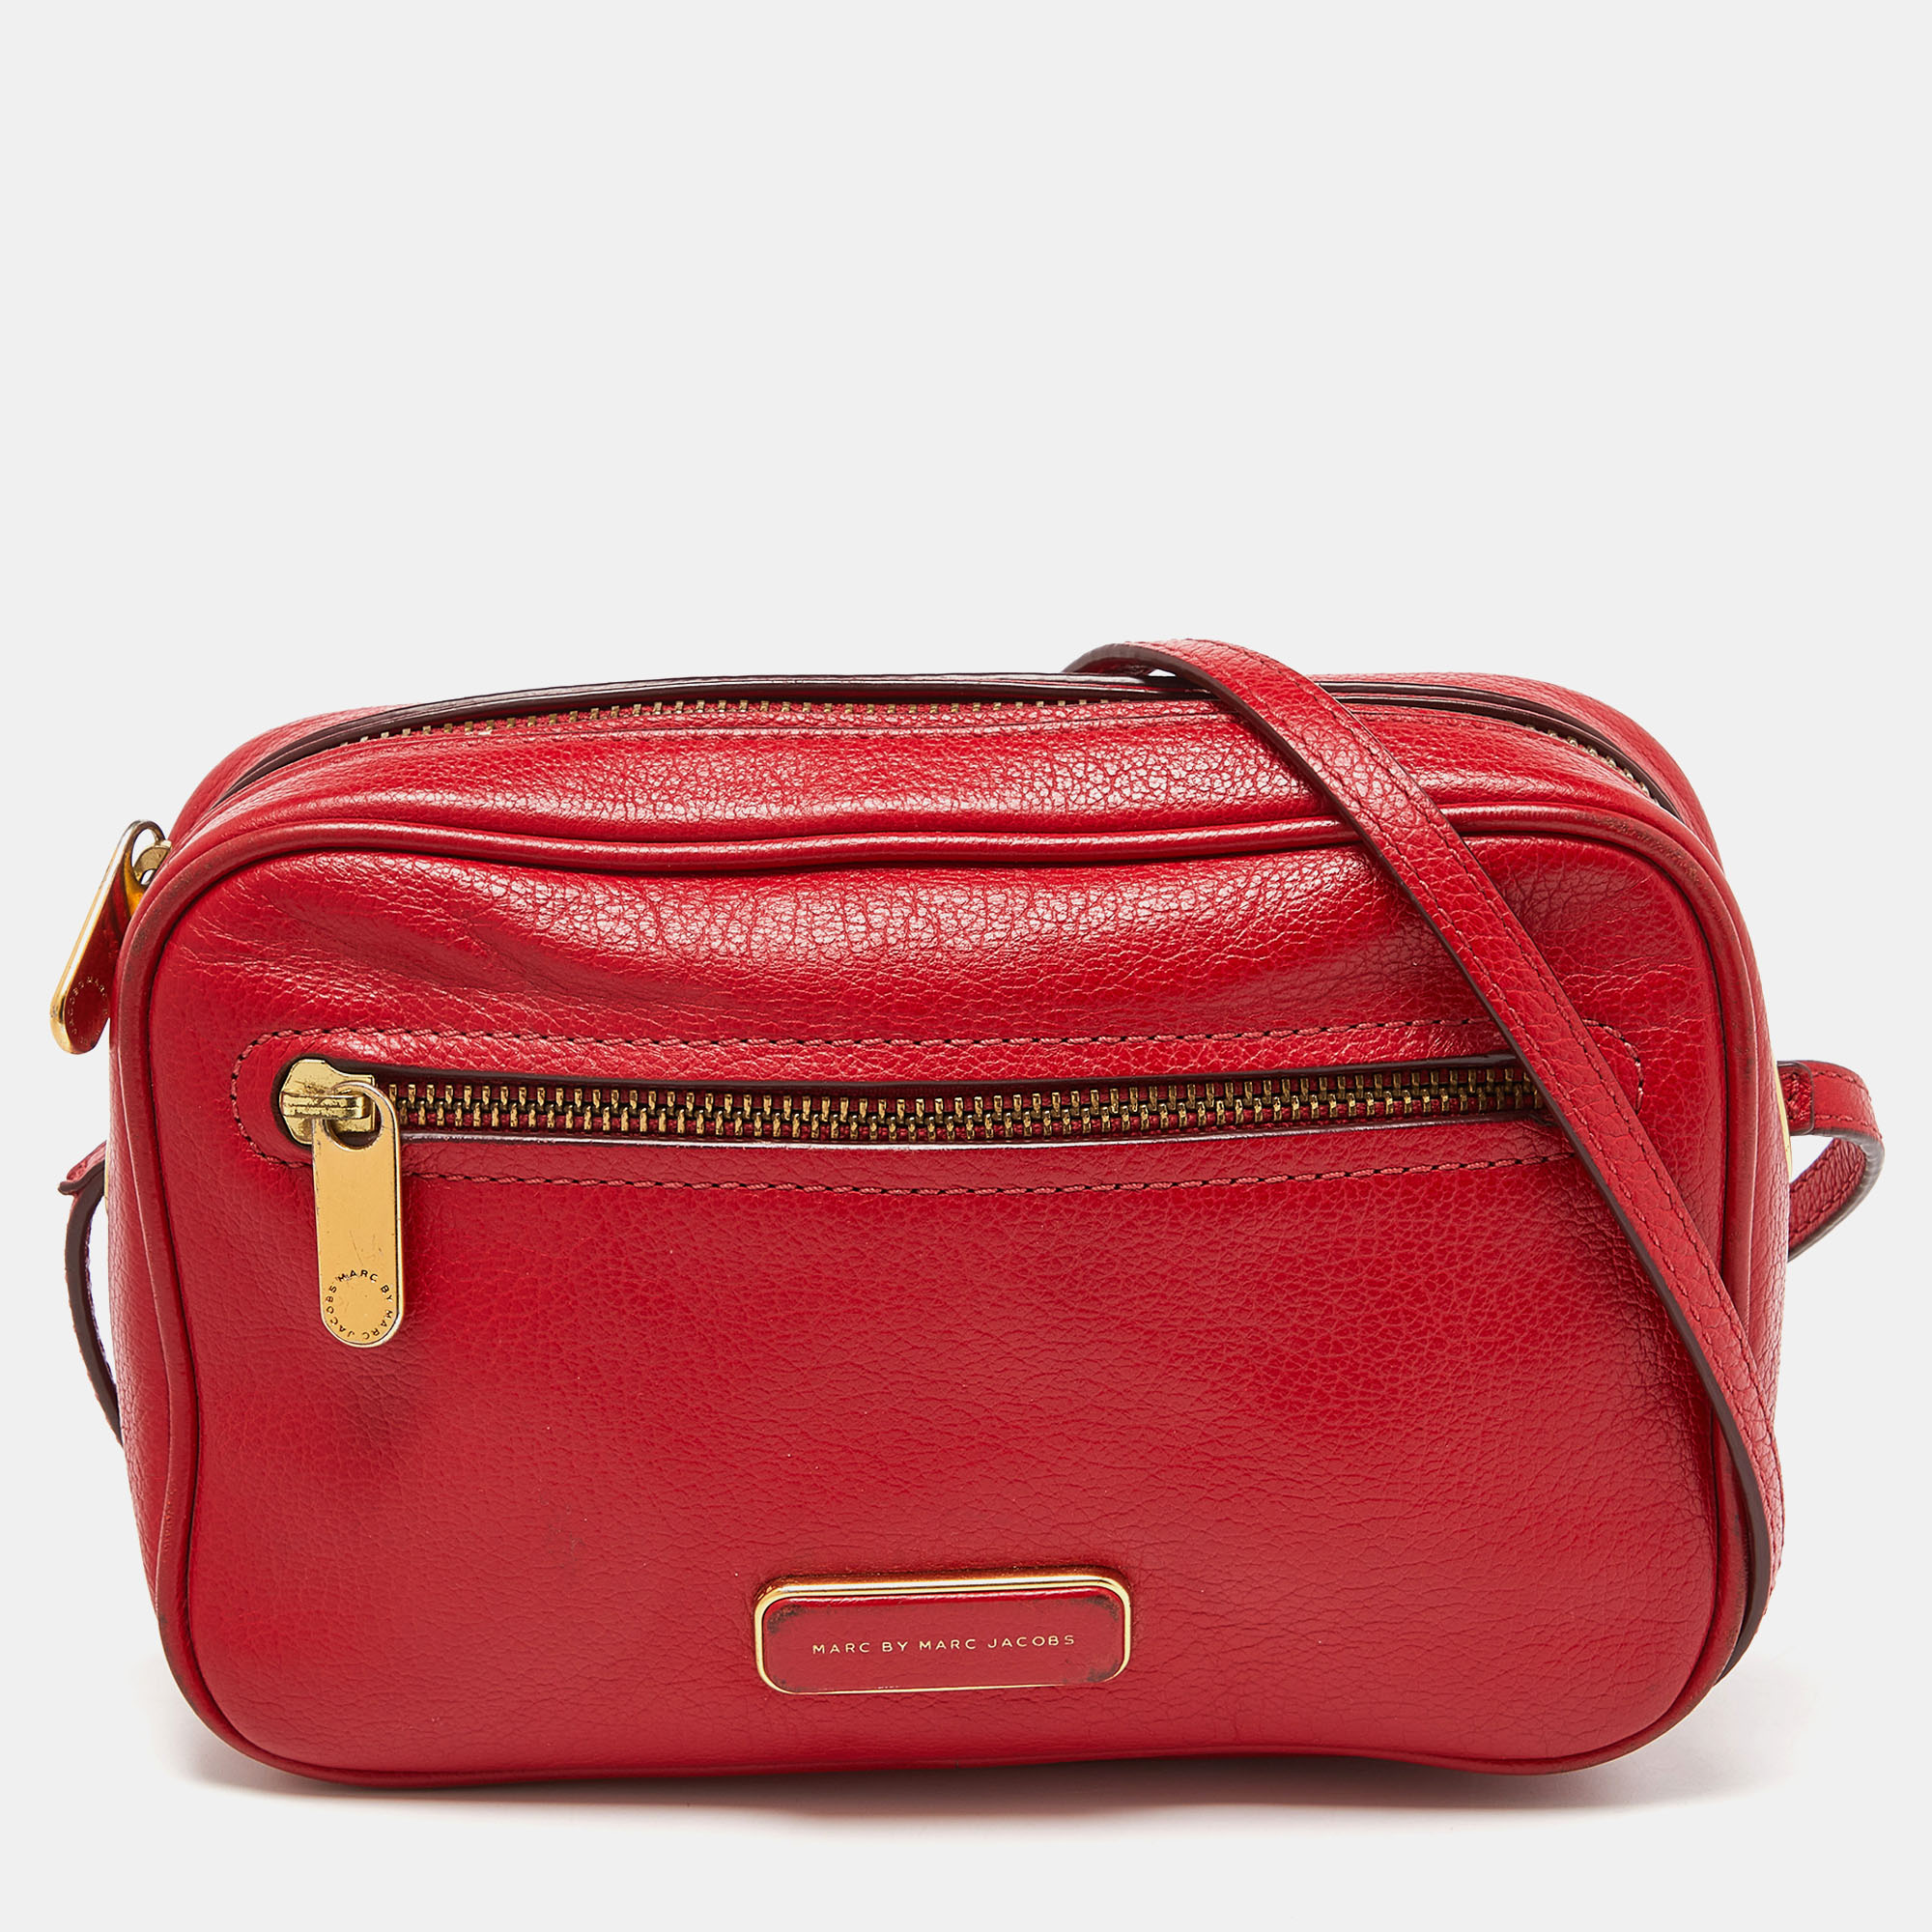 

Marc by Marc Jacobs Red Leather Crossbody Bag